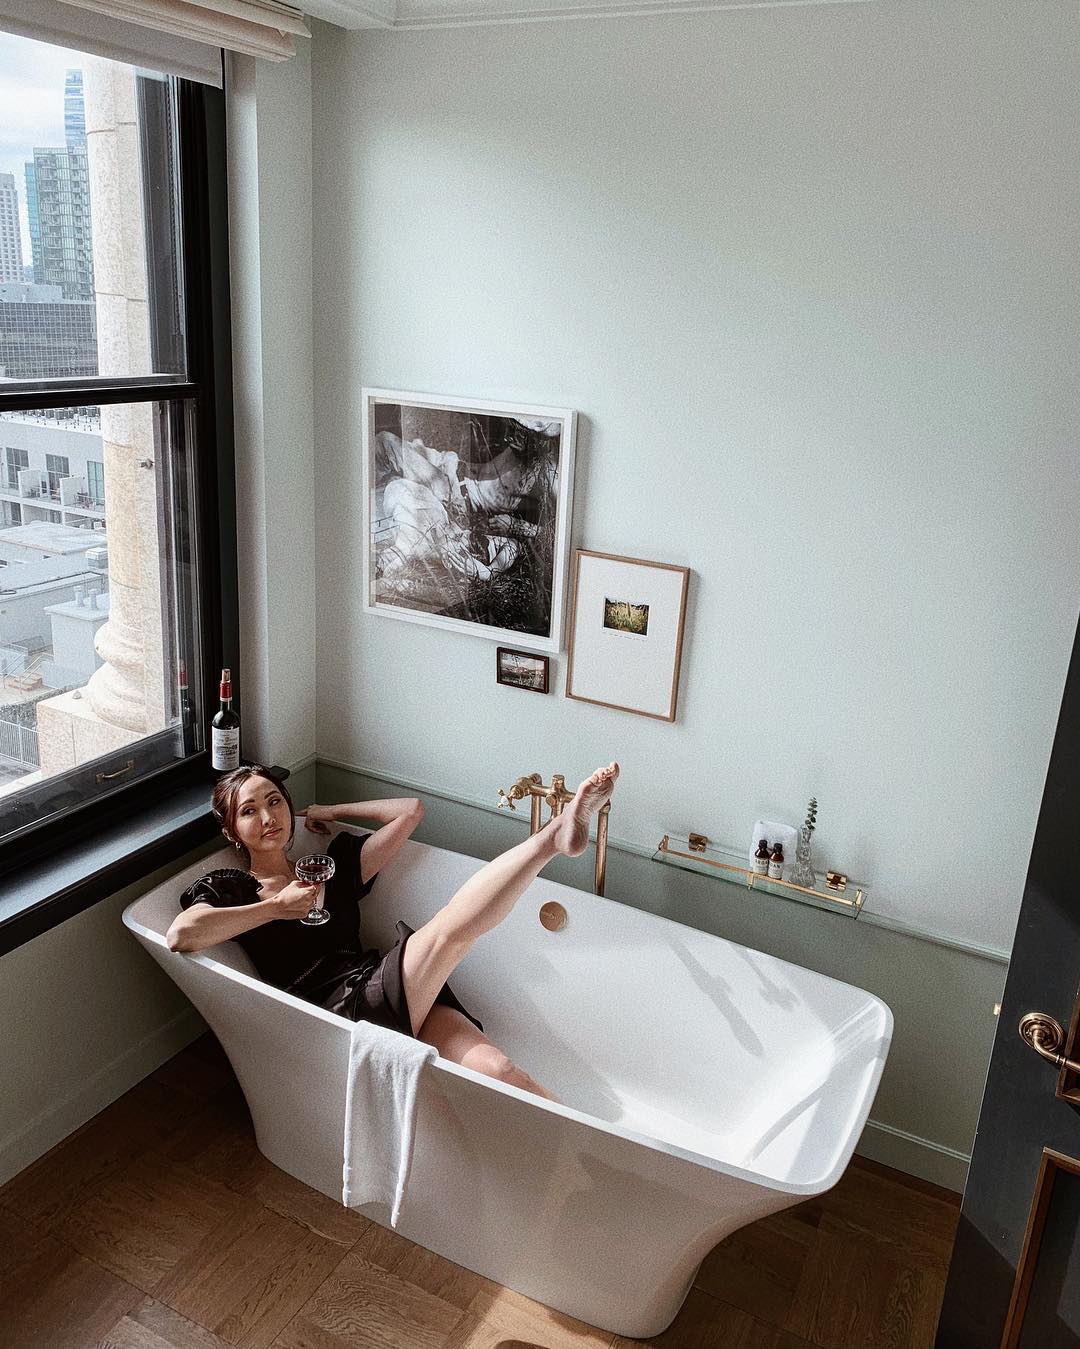 How to prepare a relaxing bath on your
tub